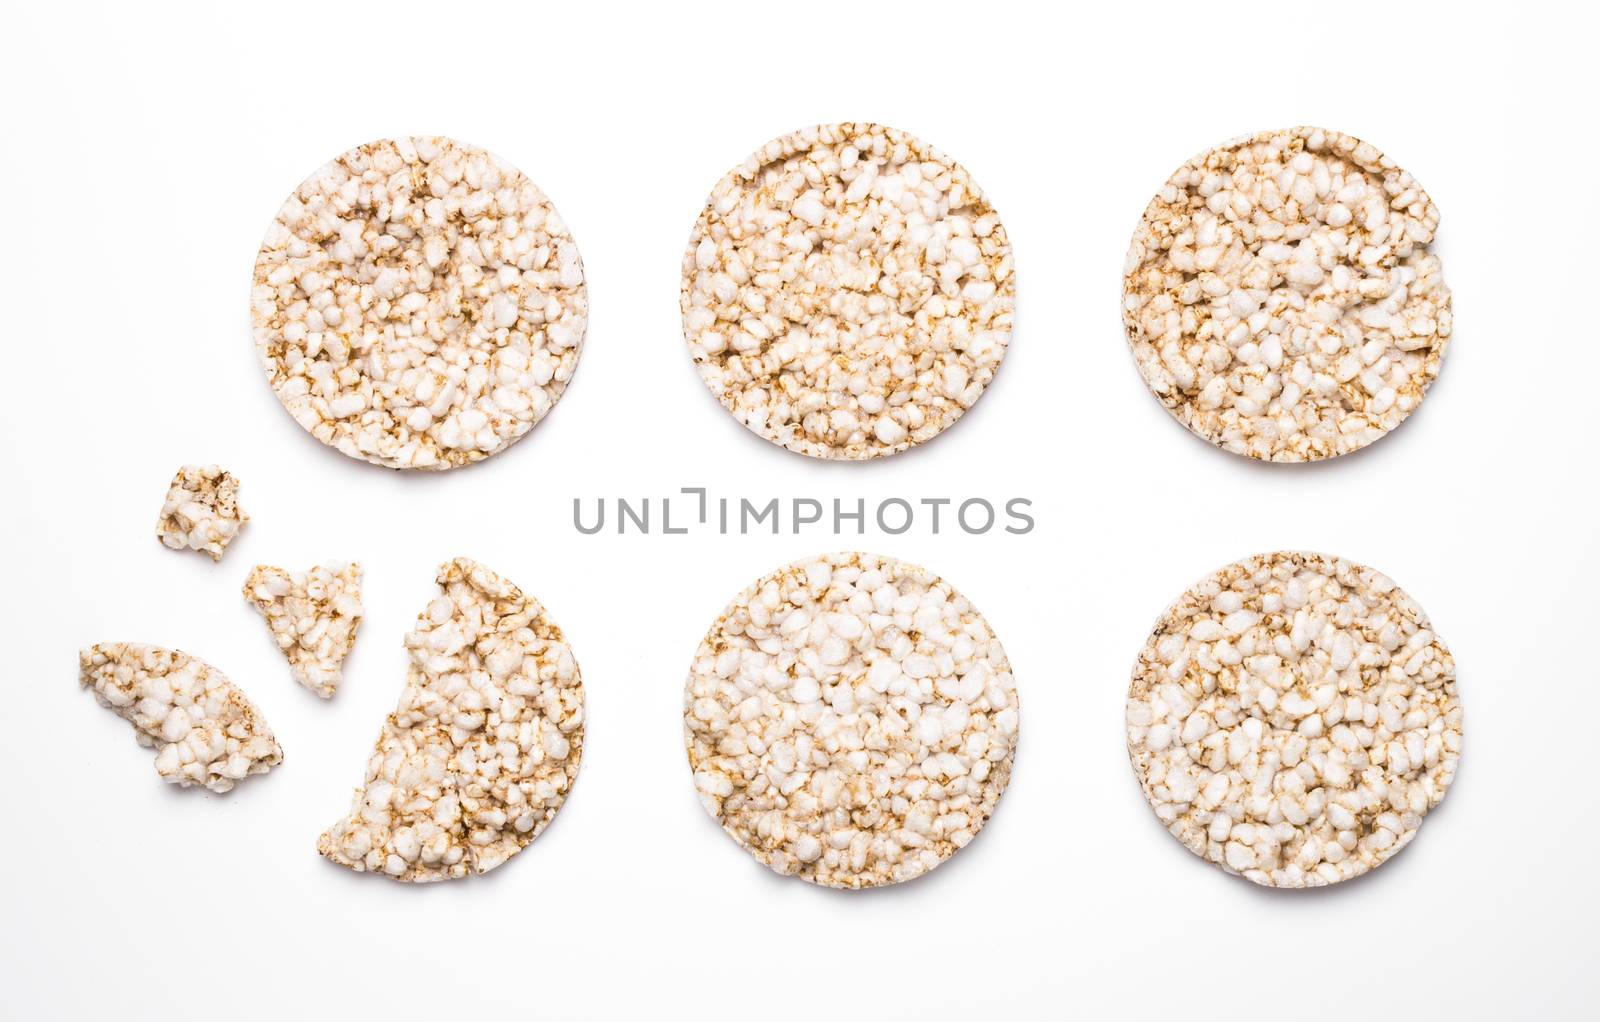 Six rice and spelled cakes isolated on white. One is broken. Concept of healthy eating and diet.